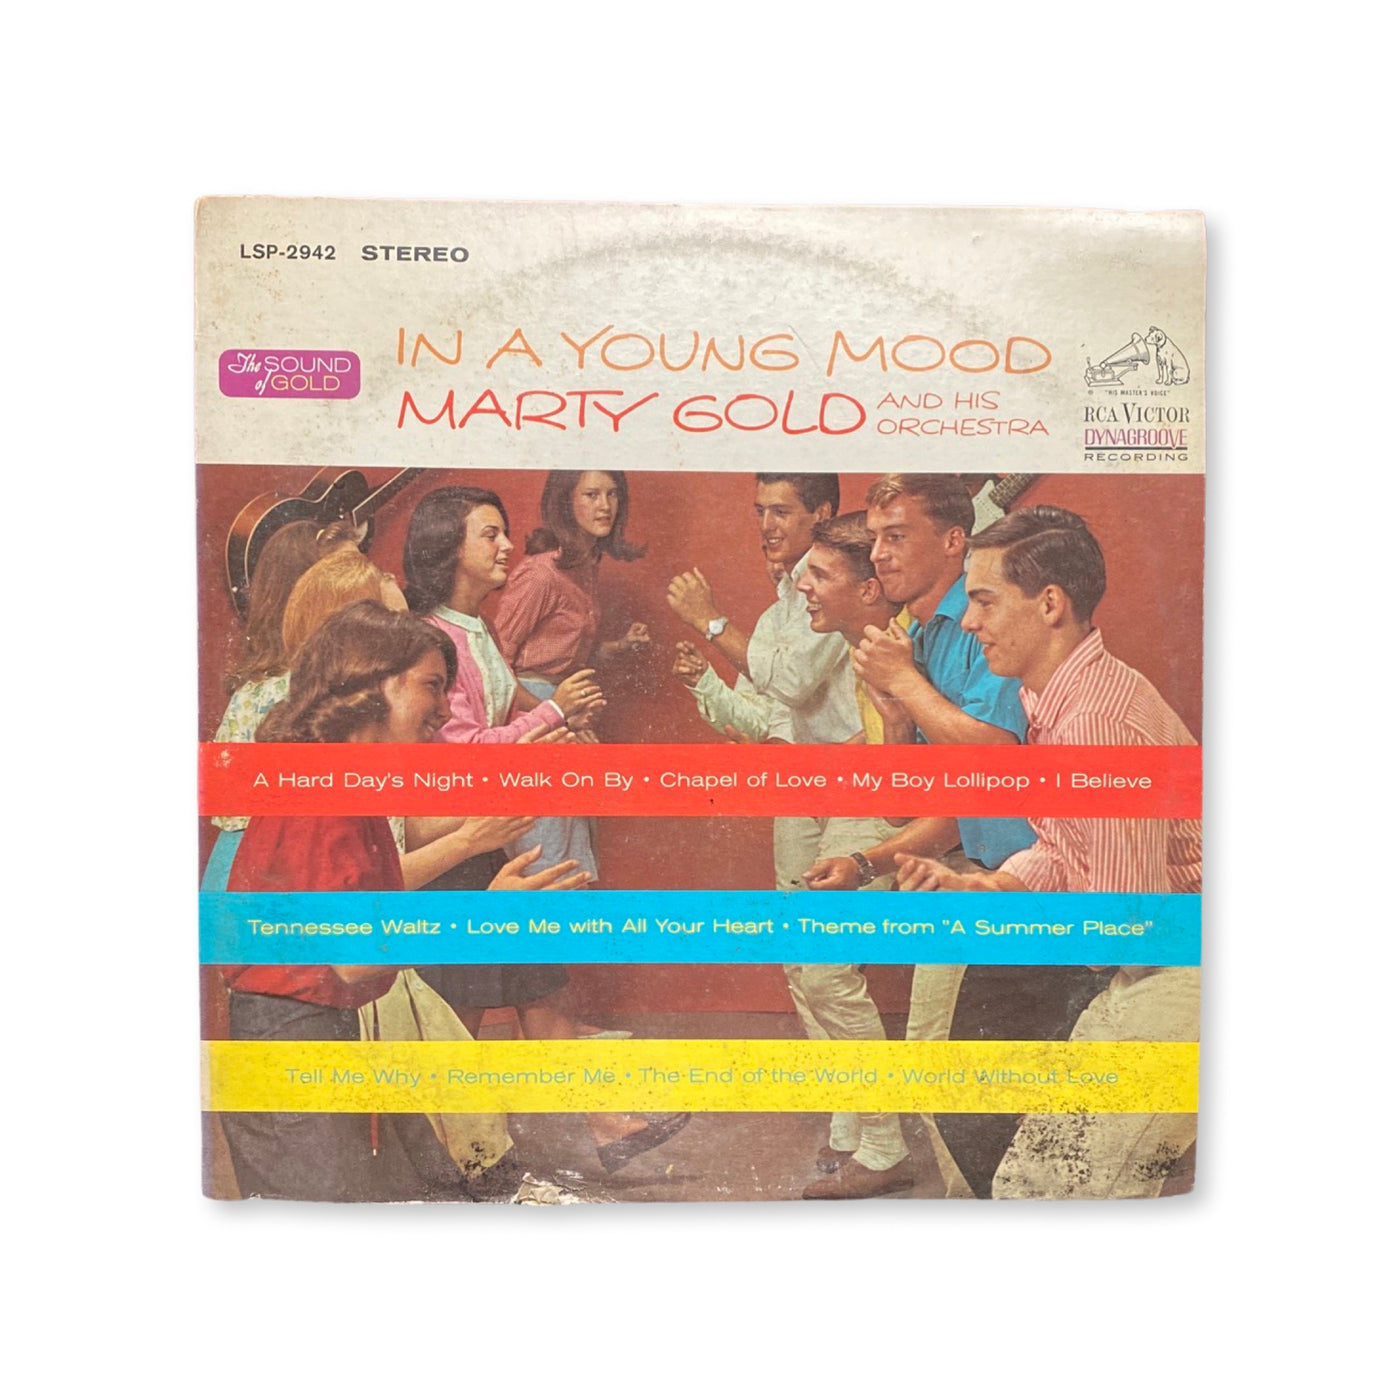 Martin Gold And His Orchestra - In A Young Mood